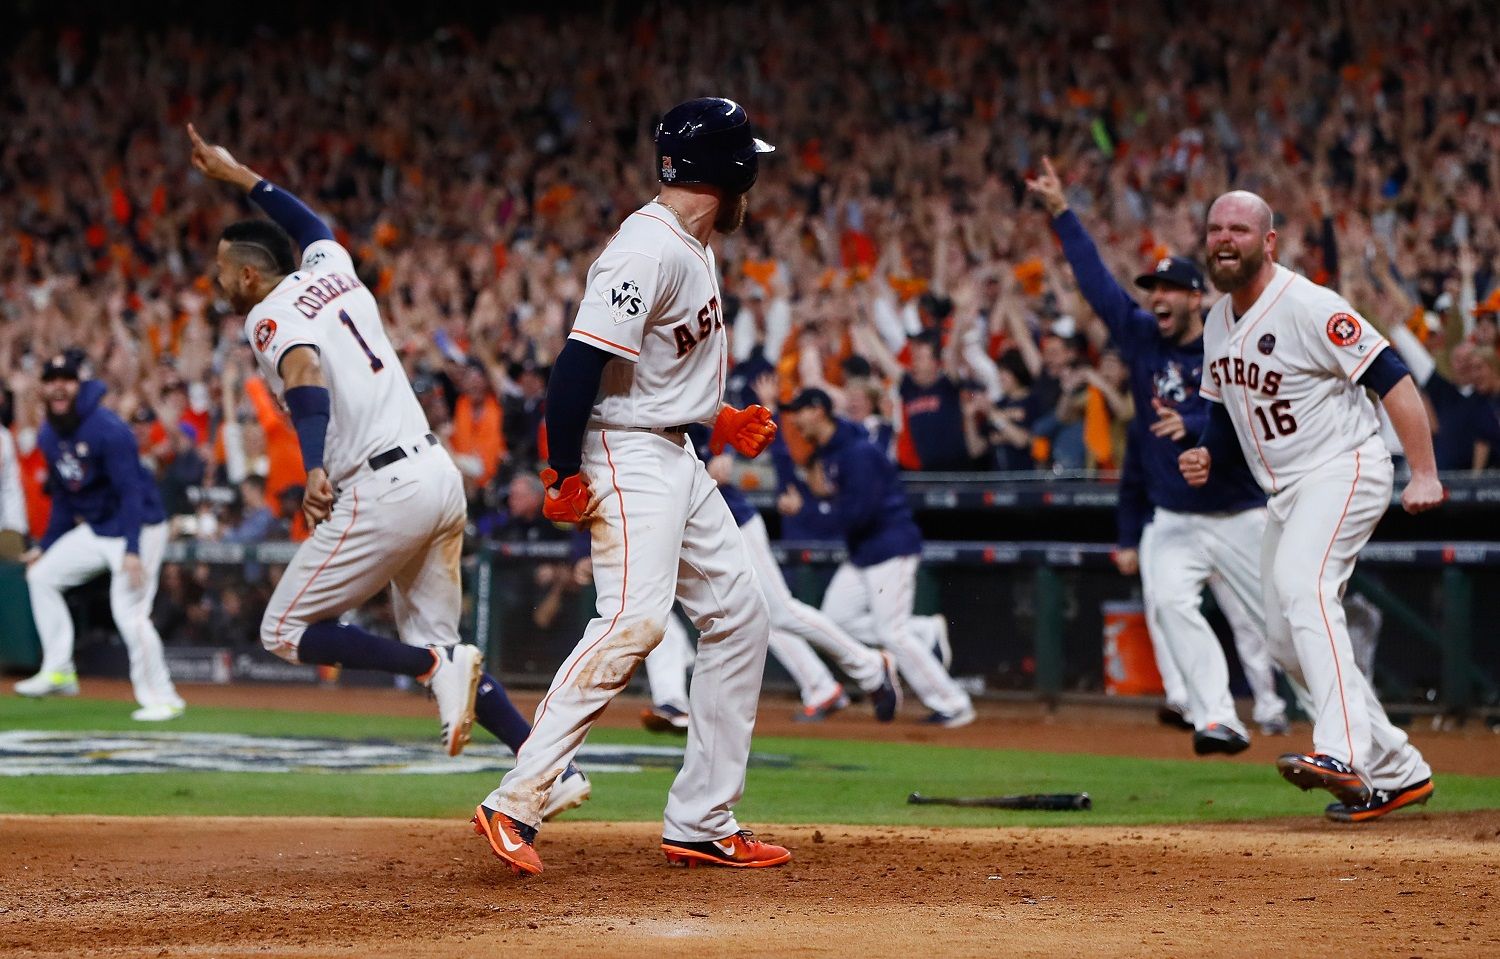 HOUSTON, TX - OCTOBER 30:  Derek Fisher #21 of the Houston Astros celebrates with Brian McCann #16 after scoring the winning run during the tenth inning against the Los Angeles Dodgers in game five of the 2017 World Series at Minute Maid Park on October 30, 2017 in Houston, Texas.  (Photo by Jamie Squire/Getty Images)